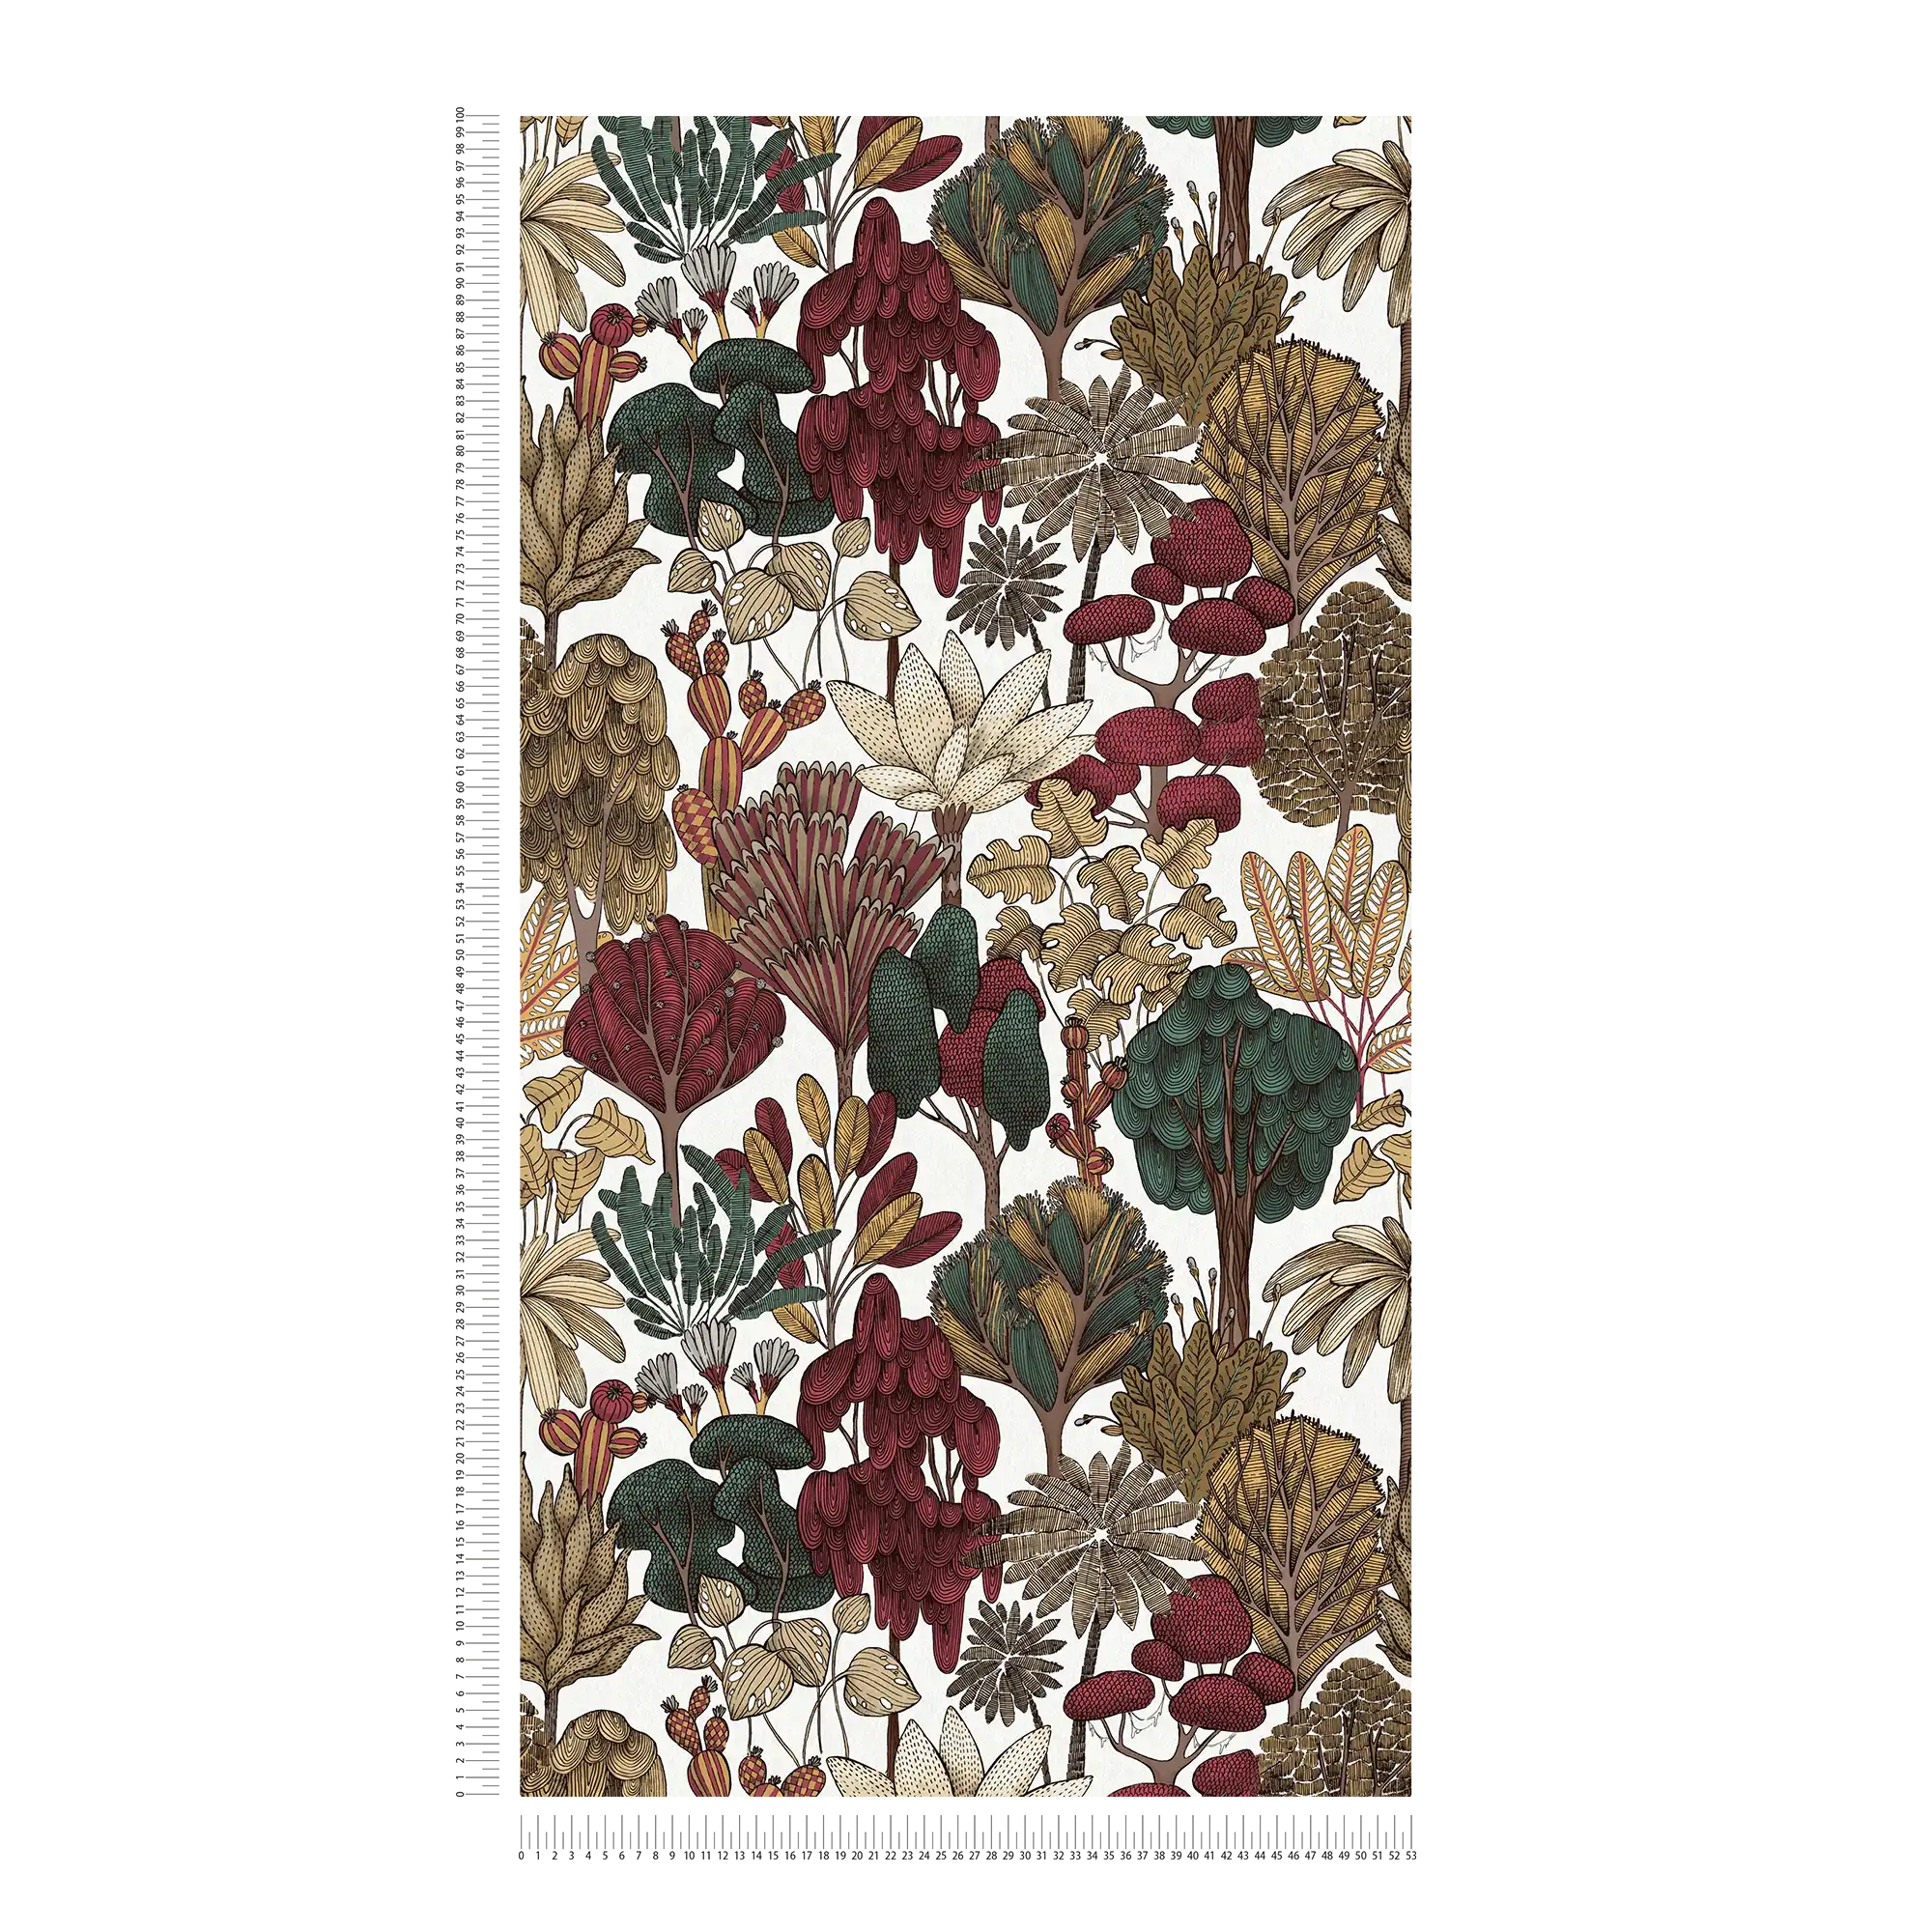             Modern wallpaper floral with trees in drawing style - red, beige, brown
        